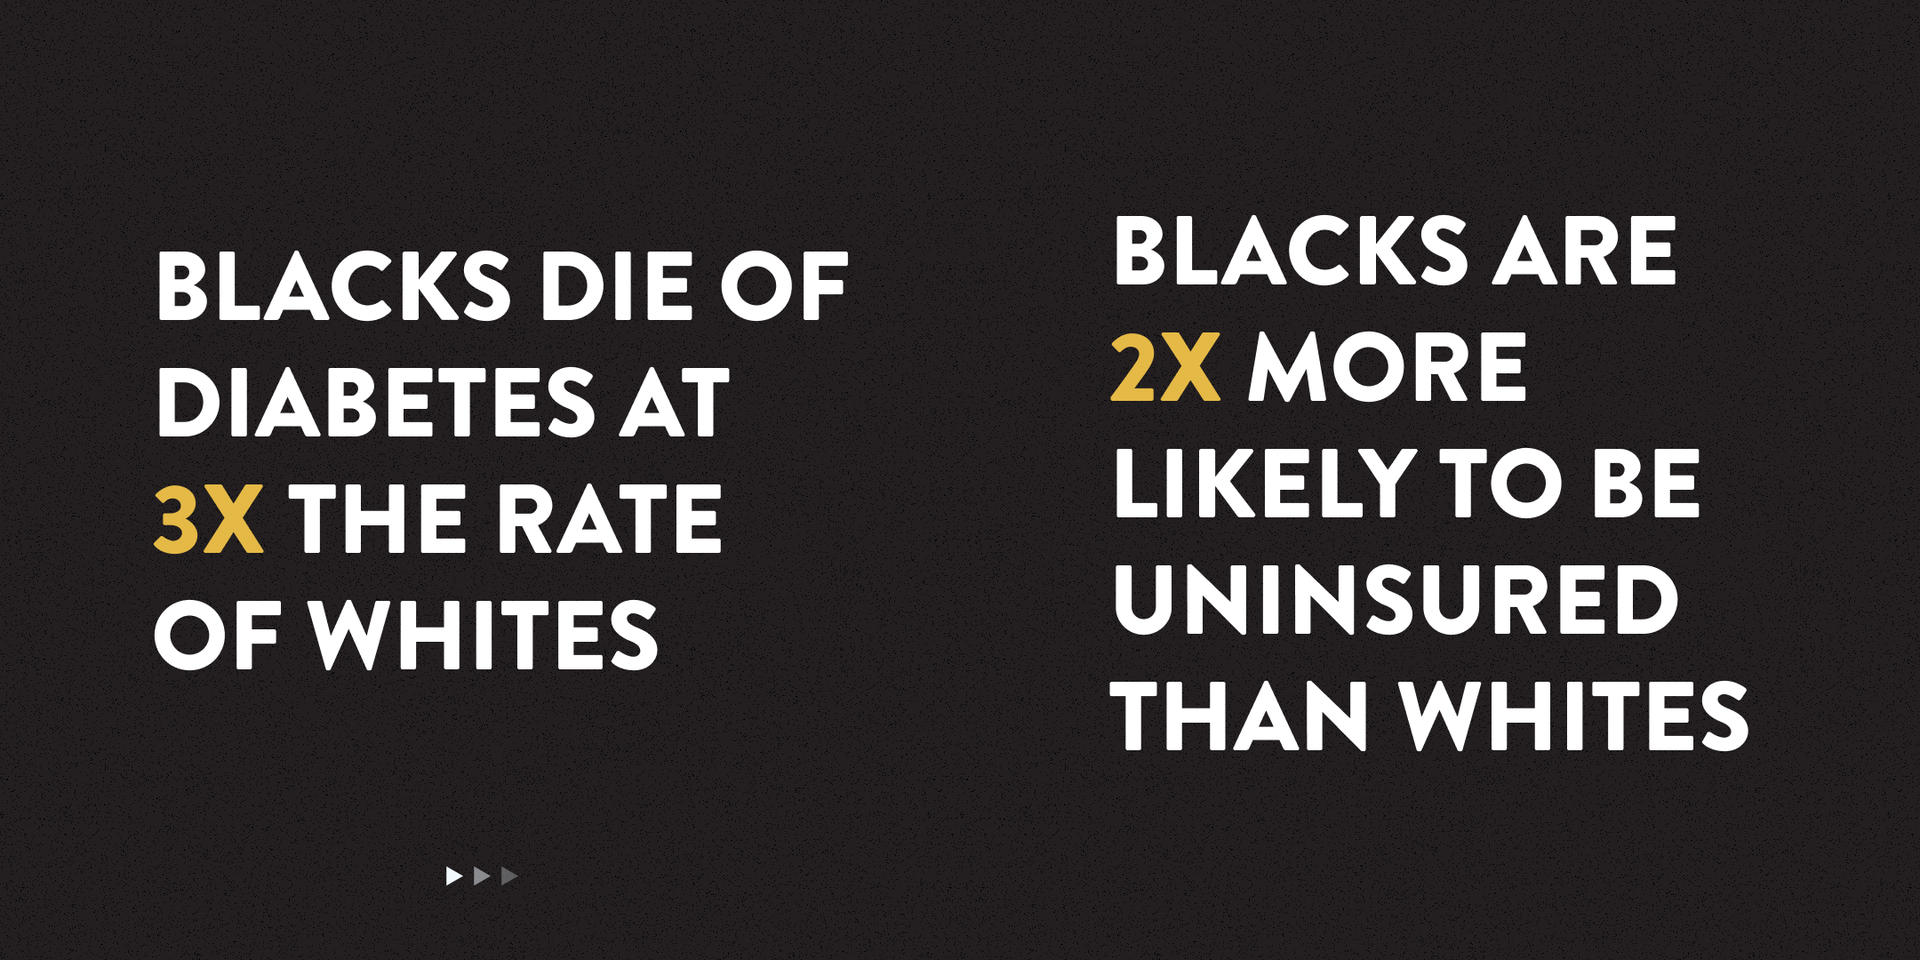 Graphic that says 'Blacks die of diabetes at 3x the rate of whites' and 'Blacks are 2x more likely to be uninsured than whites'